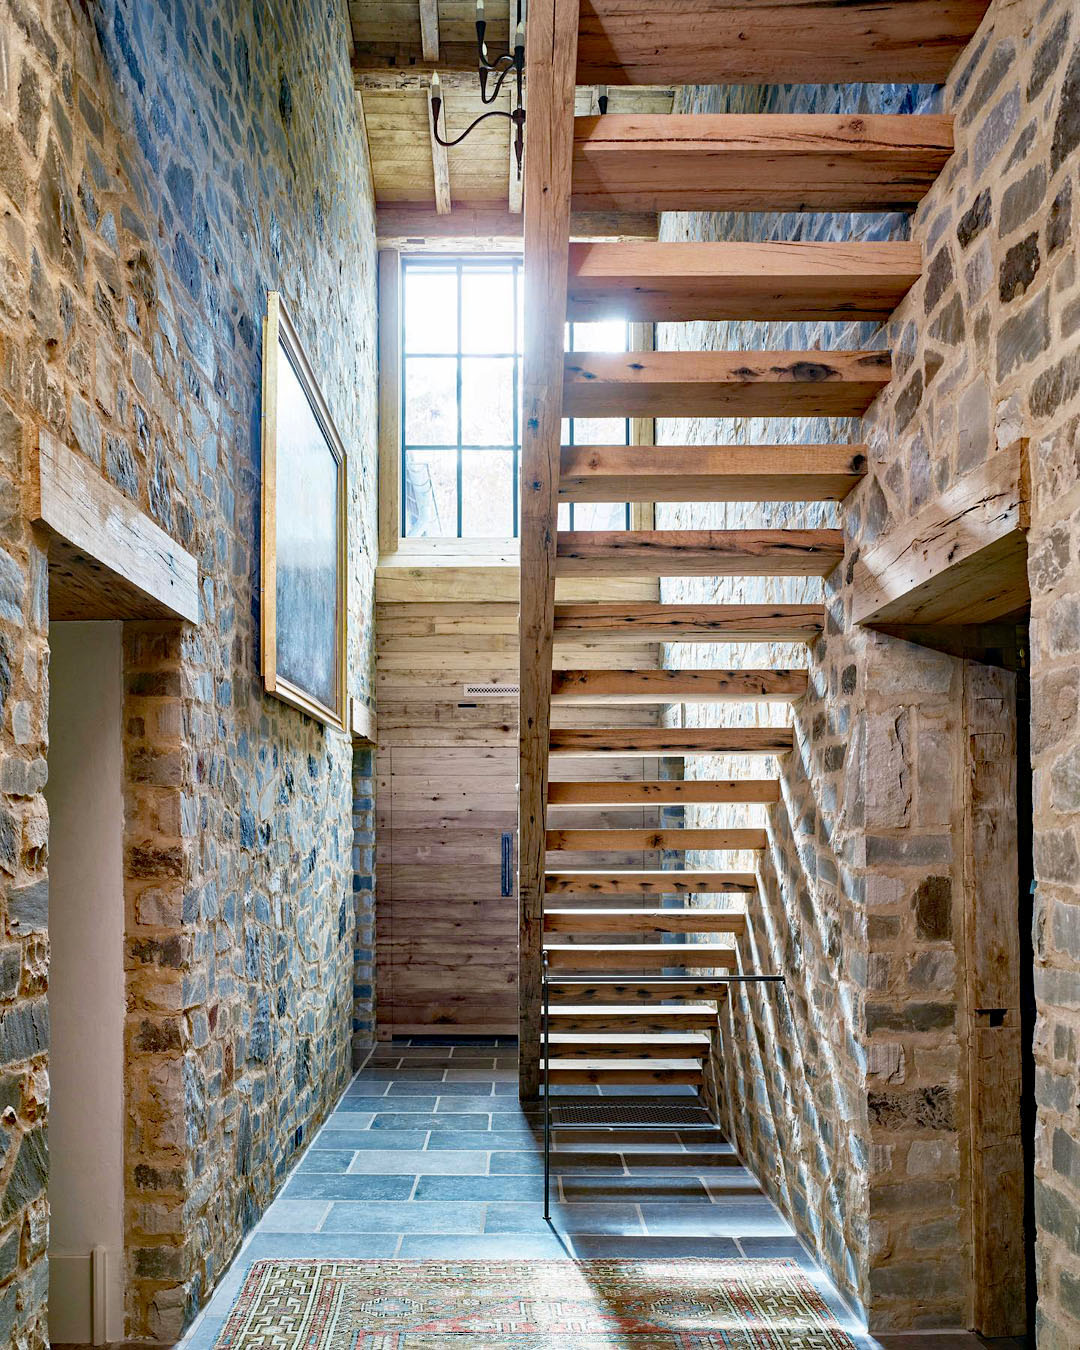 Wooden Staircase Against Rustic Stone Walls